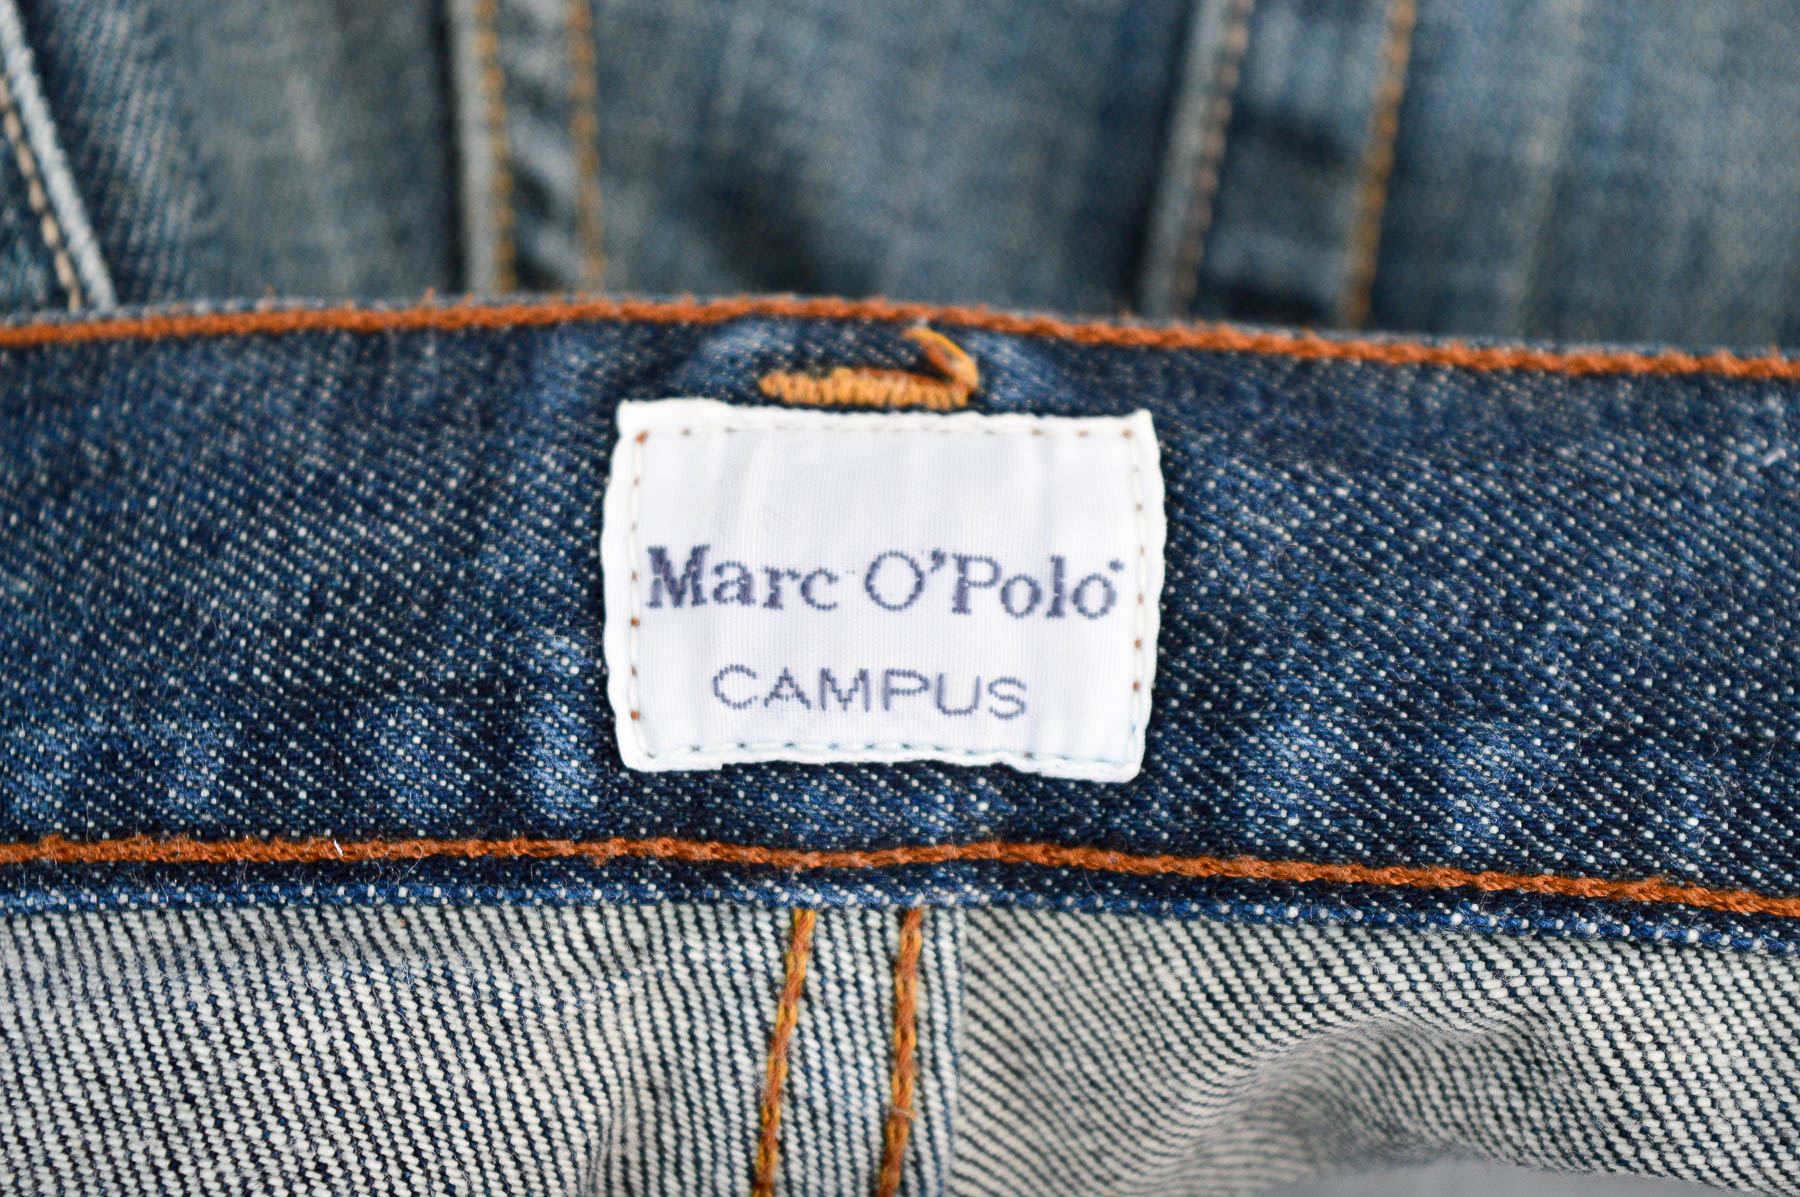 Men's jeans - CAMPUS by Marc O' Polo - 2